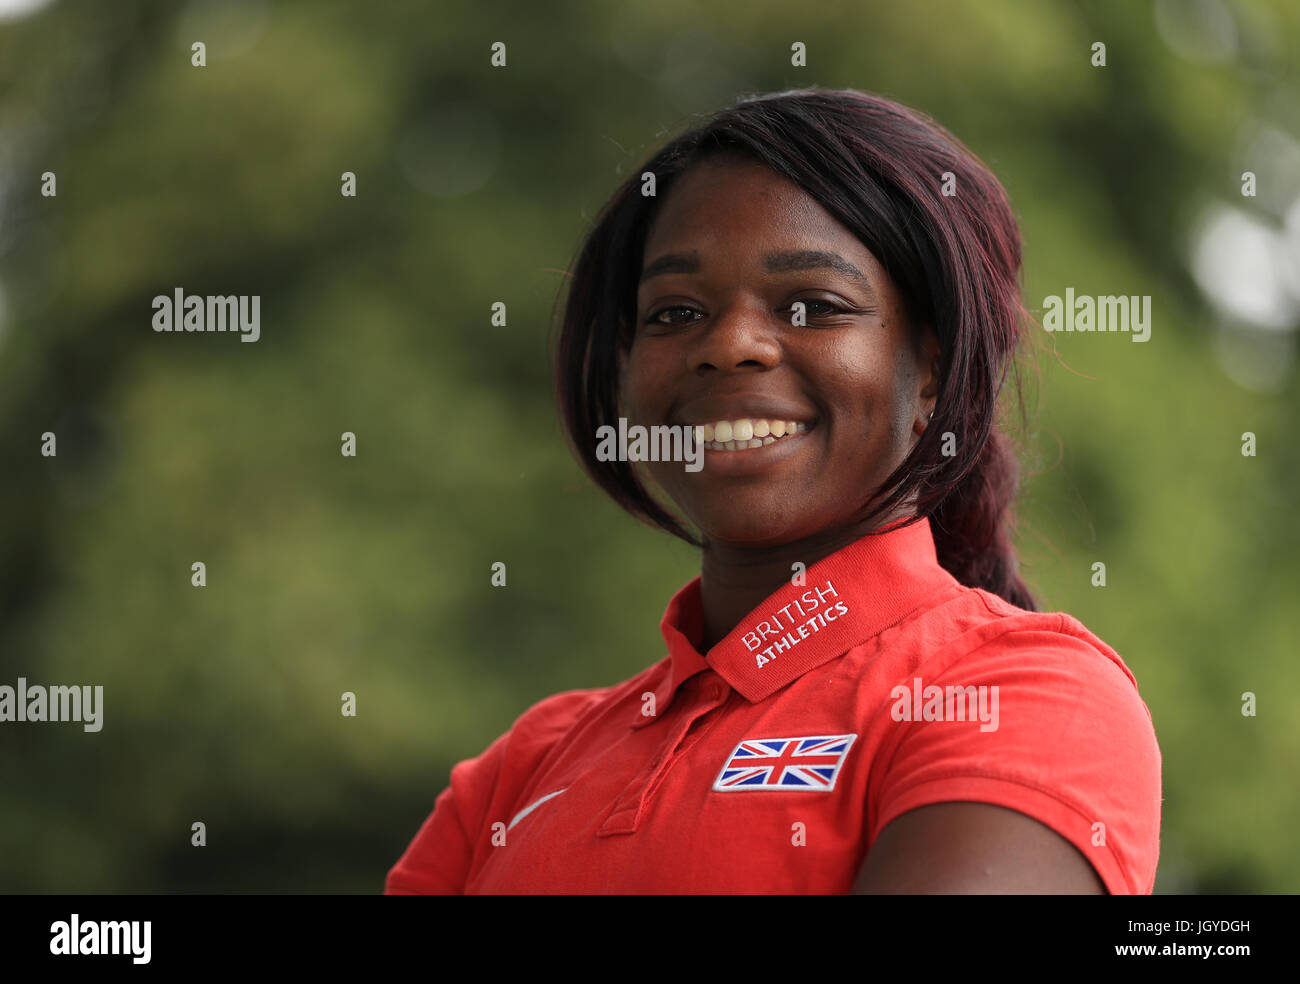 Sprinter Asha Philip during the team announcement ahead of the IAAF World Championships, at the Loughborough University High Performance Centre. Stock Photo